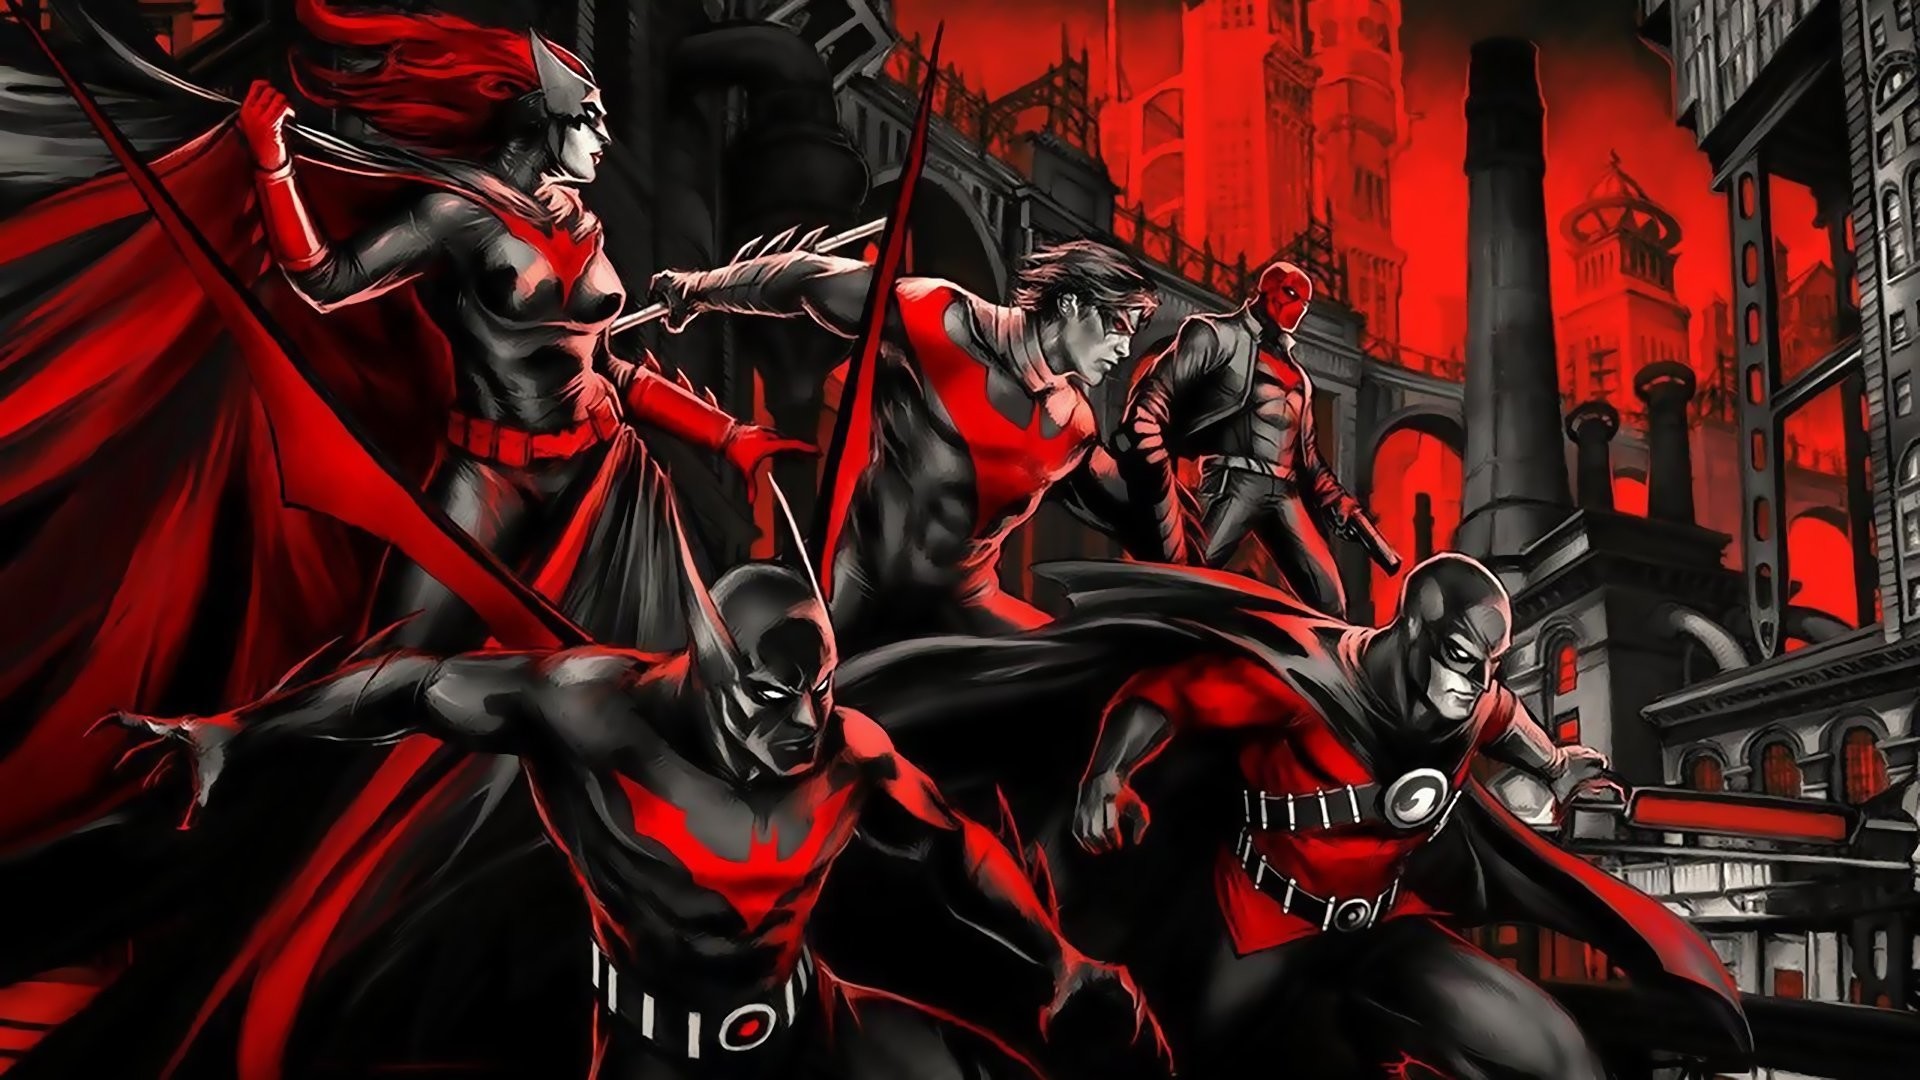 1920x1080 Tim Drake images REd Robin #1 HD wallpaper and background photos .